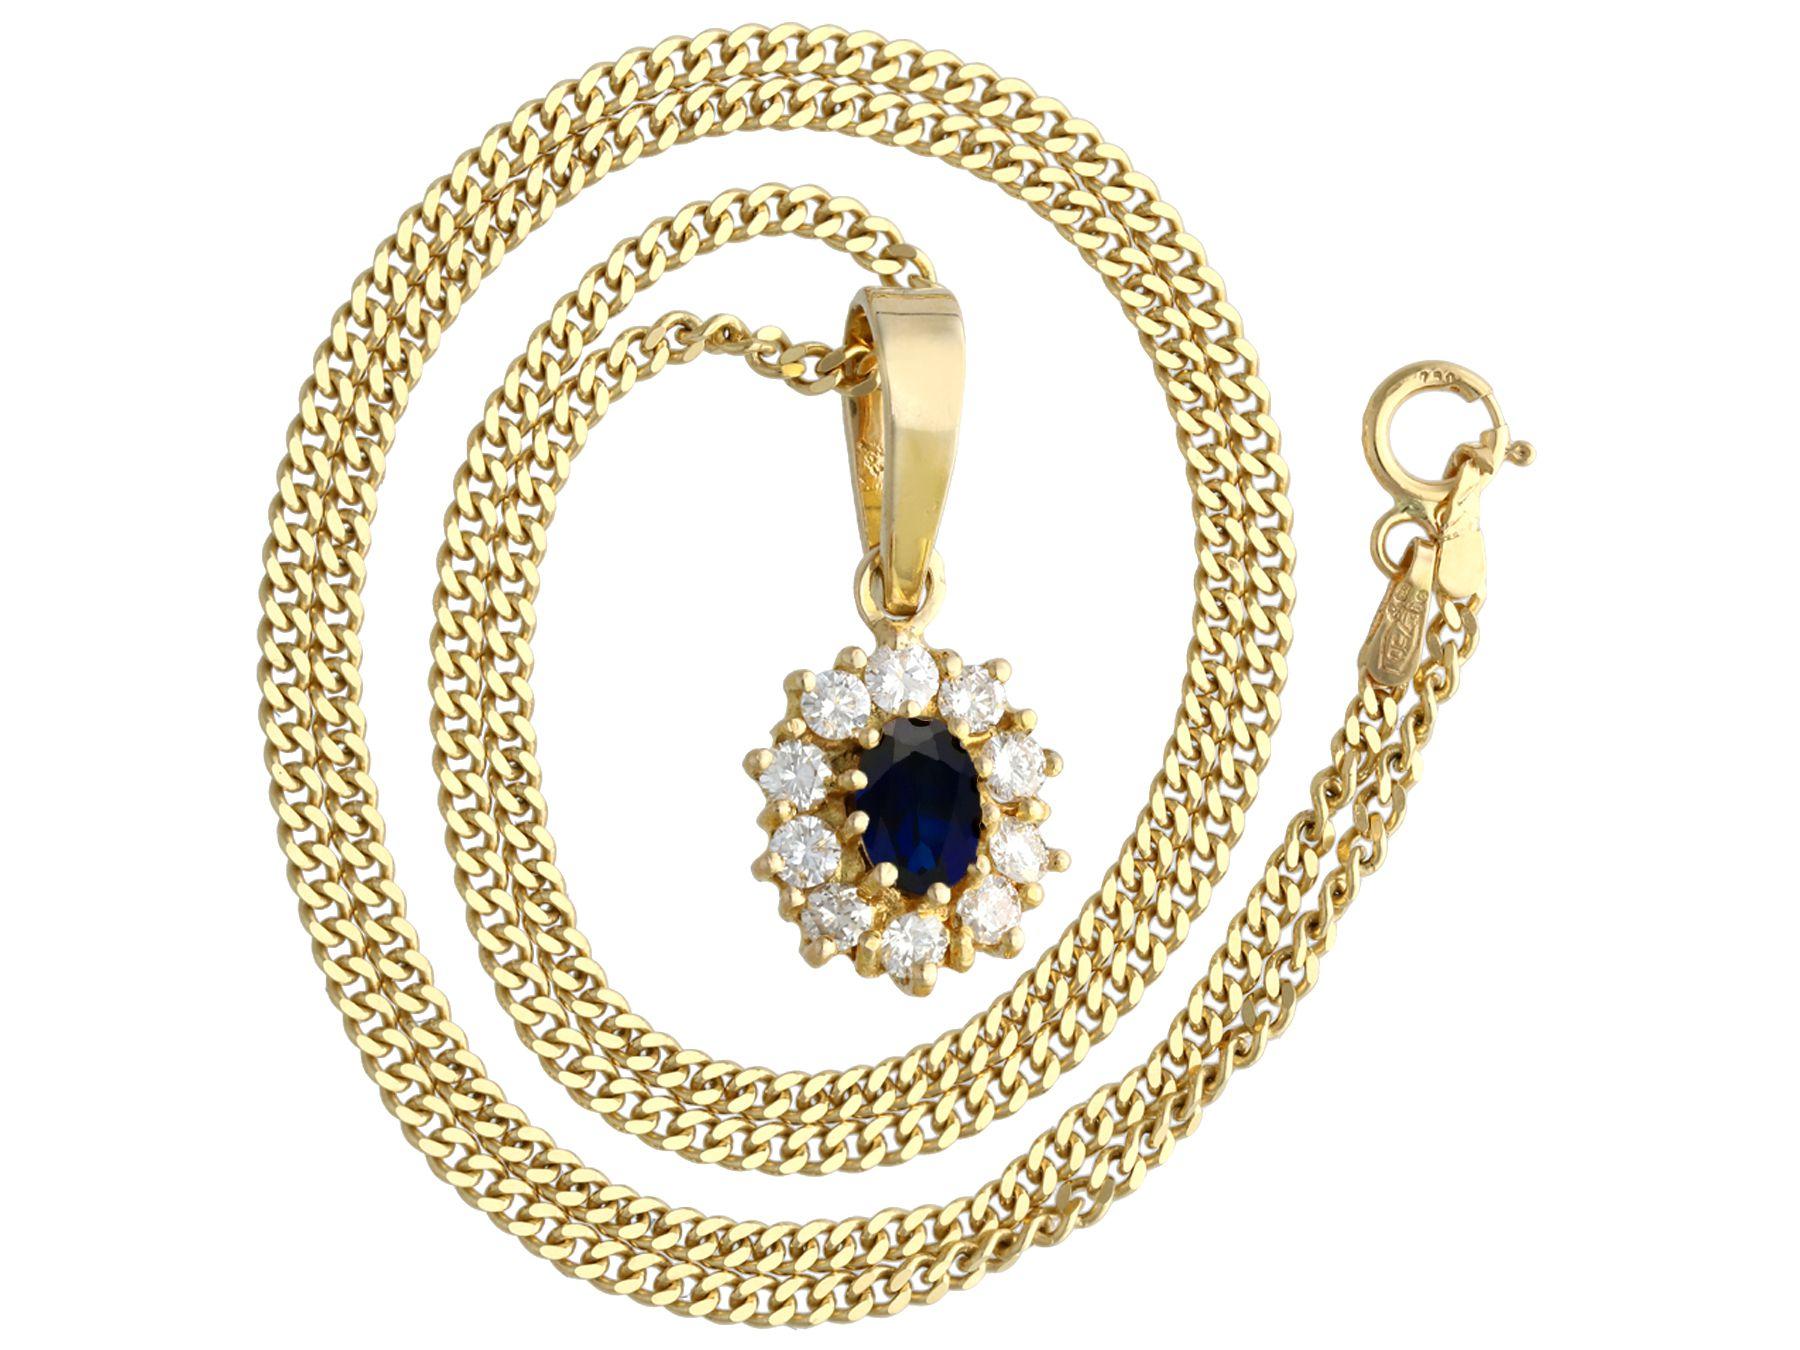 An impressive vintage 0.62 carat blue sapphire and 0.35 carat diamond, 18 karat yellow gold cluster pendant; part of our diverse gemstone jewelry collections.

This fine and impressive oval cut blue sapphire and diamond pendant has been crafted in